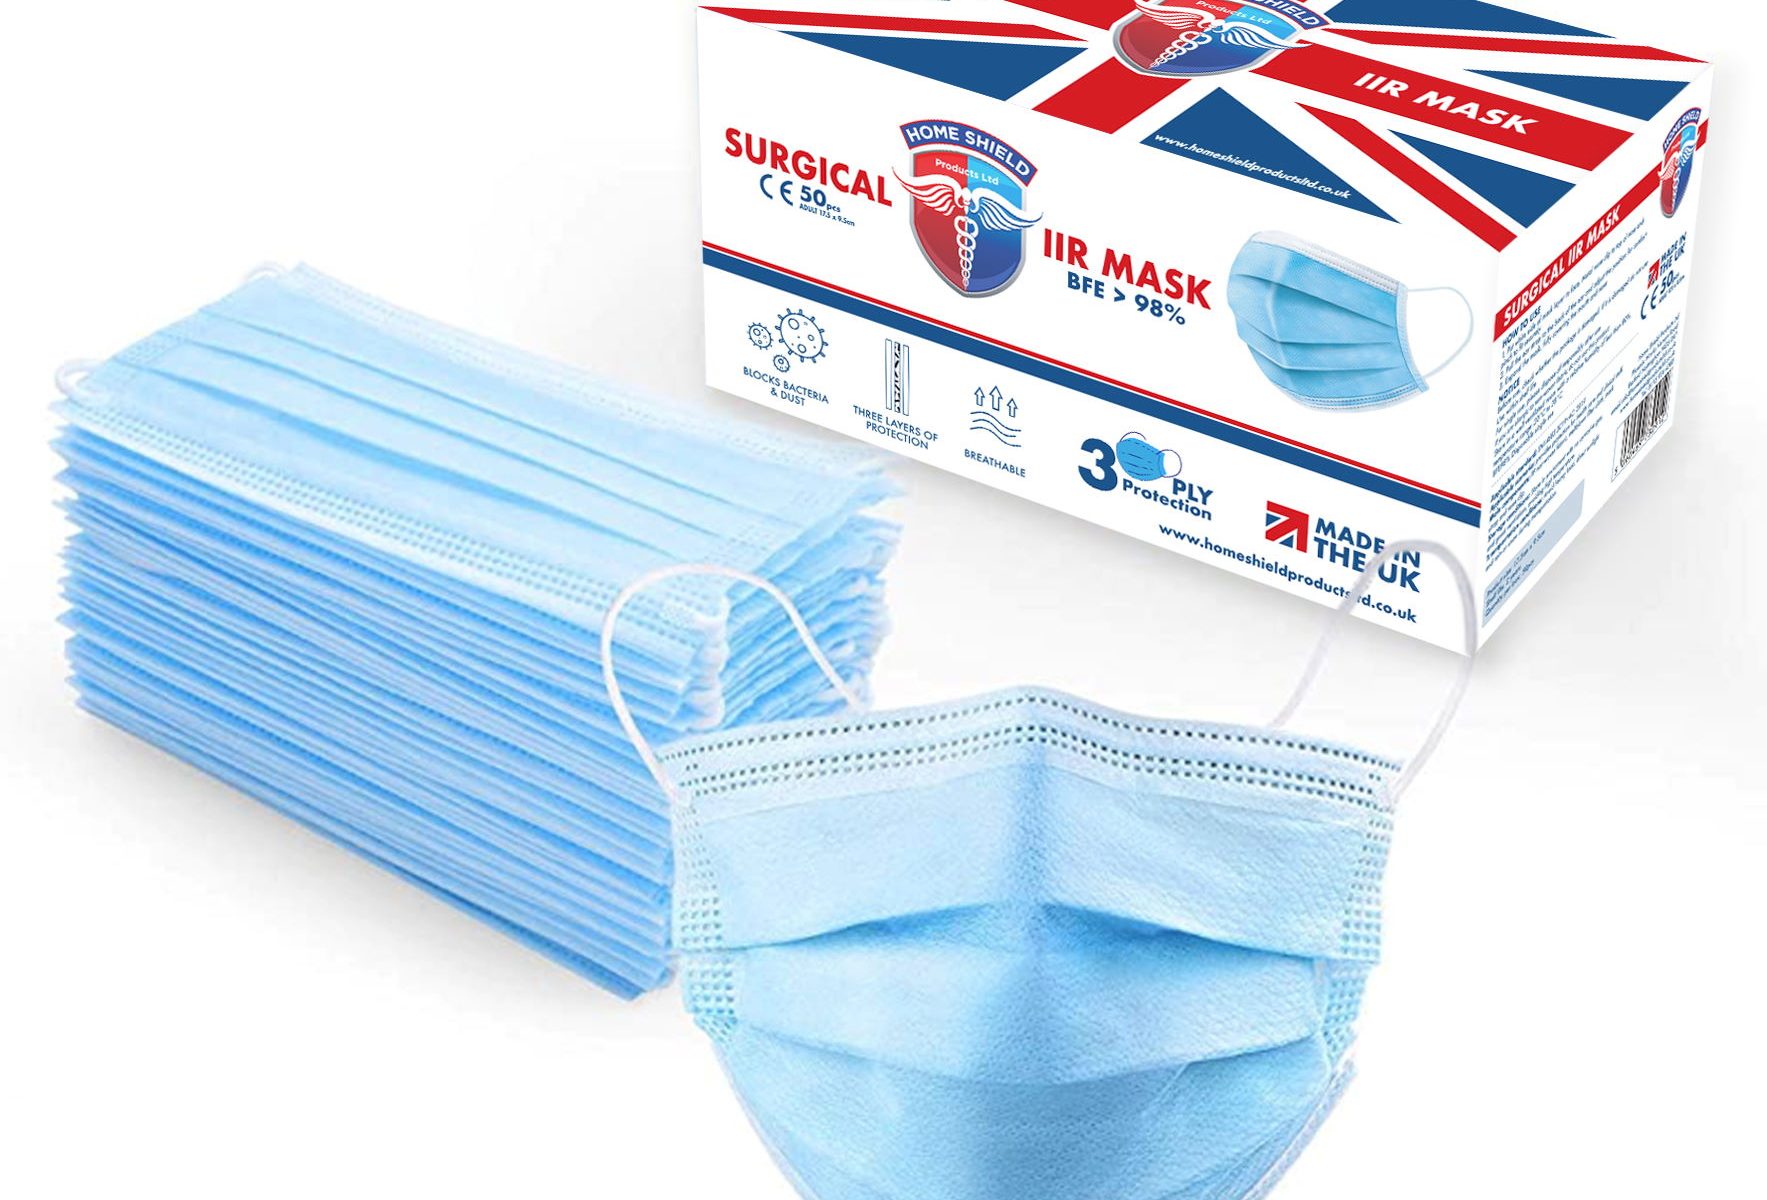 Shows The Type IIR Face Masks Made In The UK By Home Shield Products Ltd